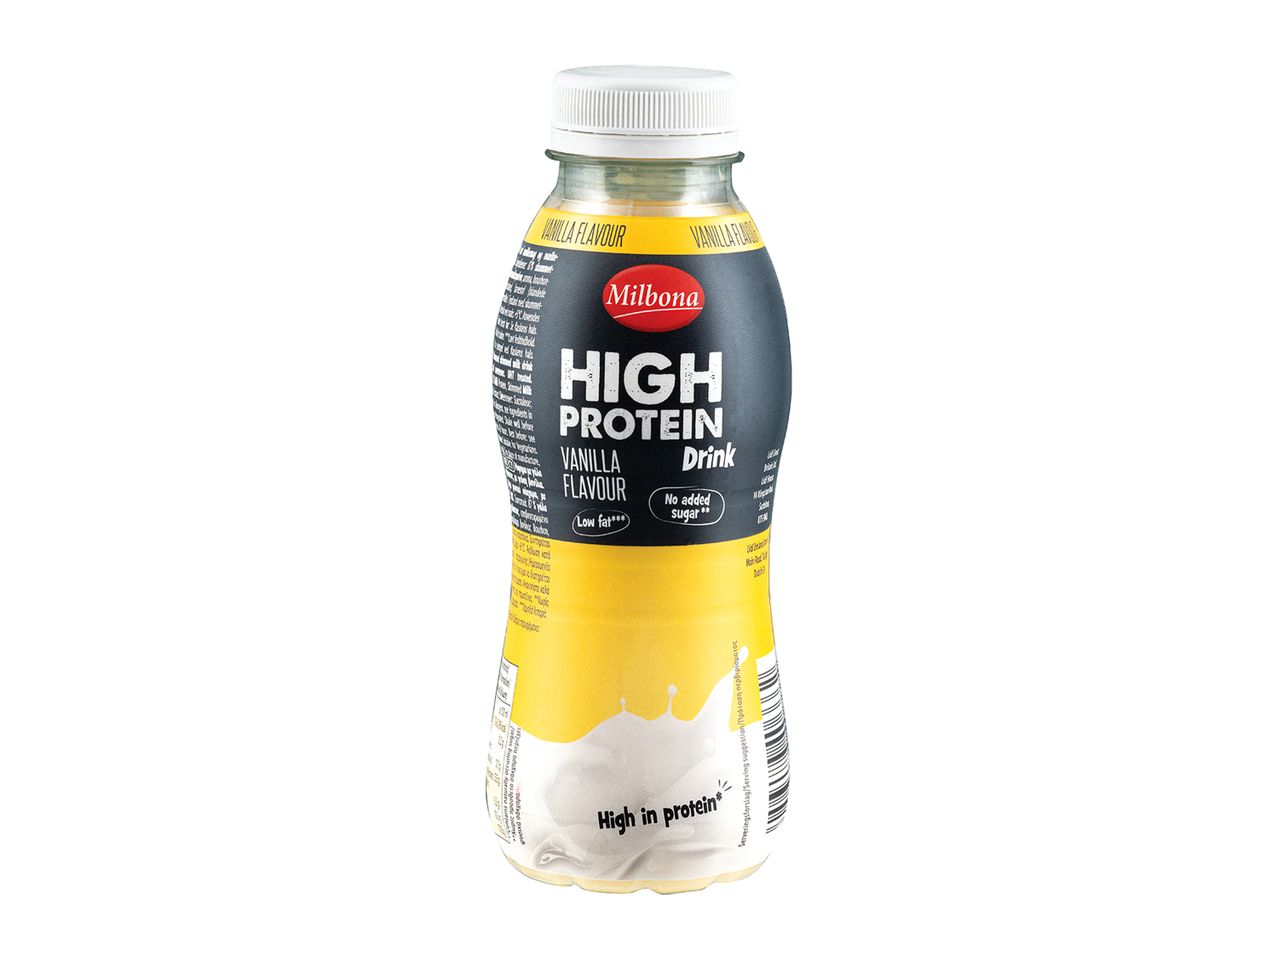 Go to full screen view: Milbona High Protein Drink Vanilla - Image 1